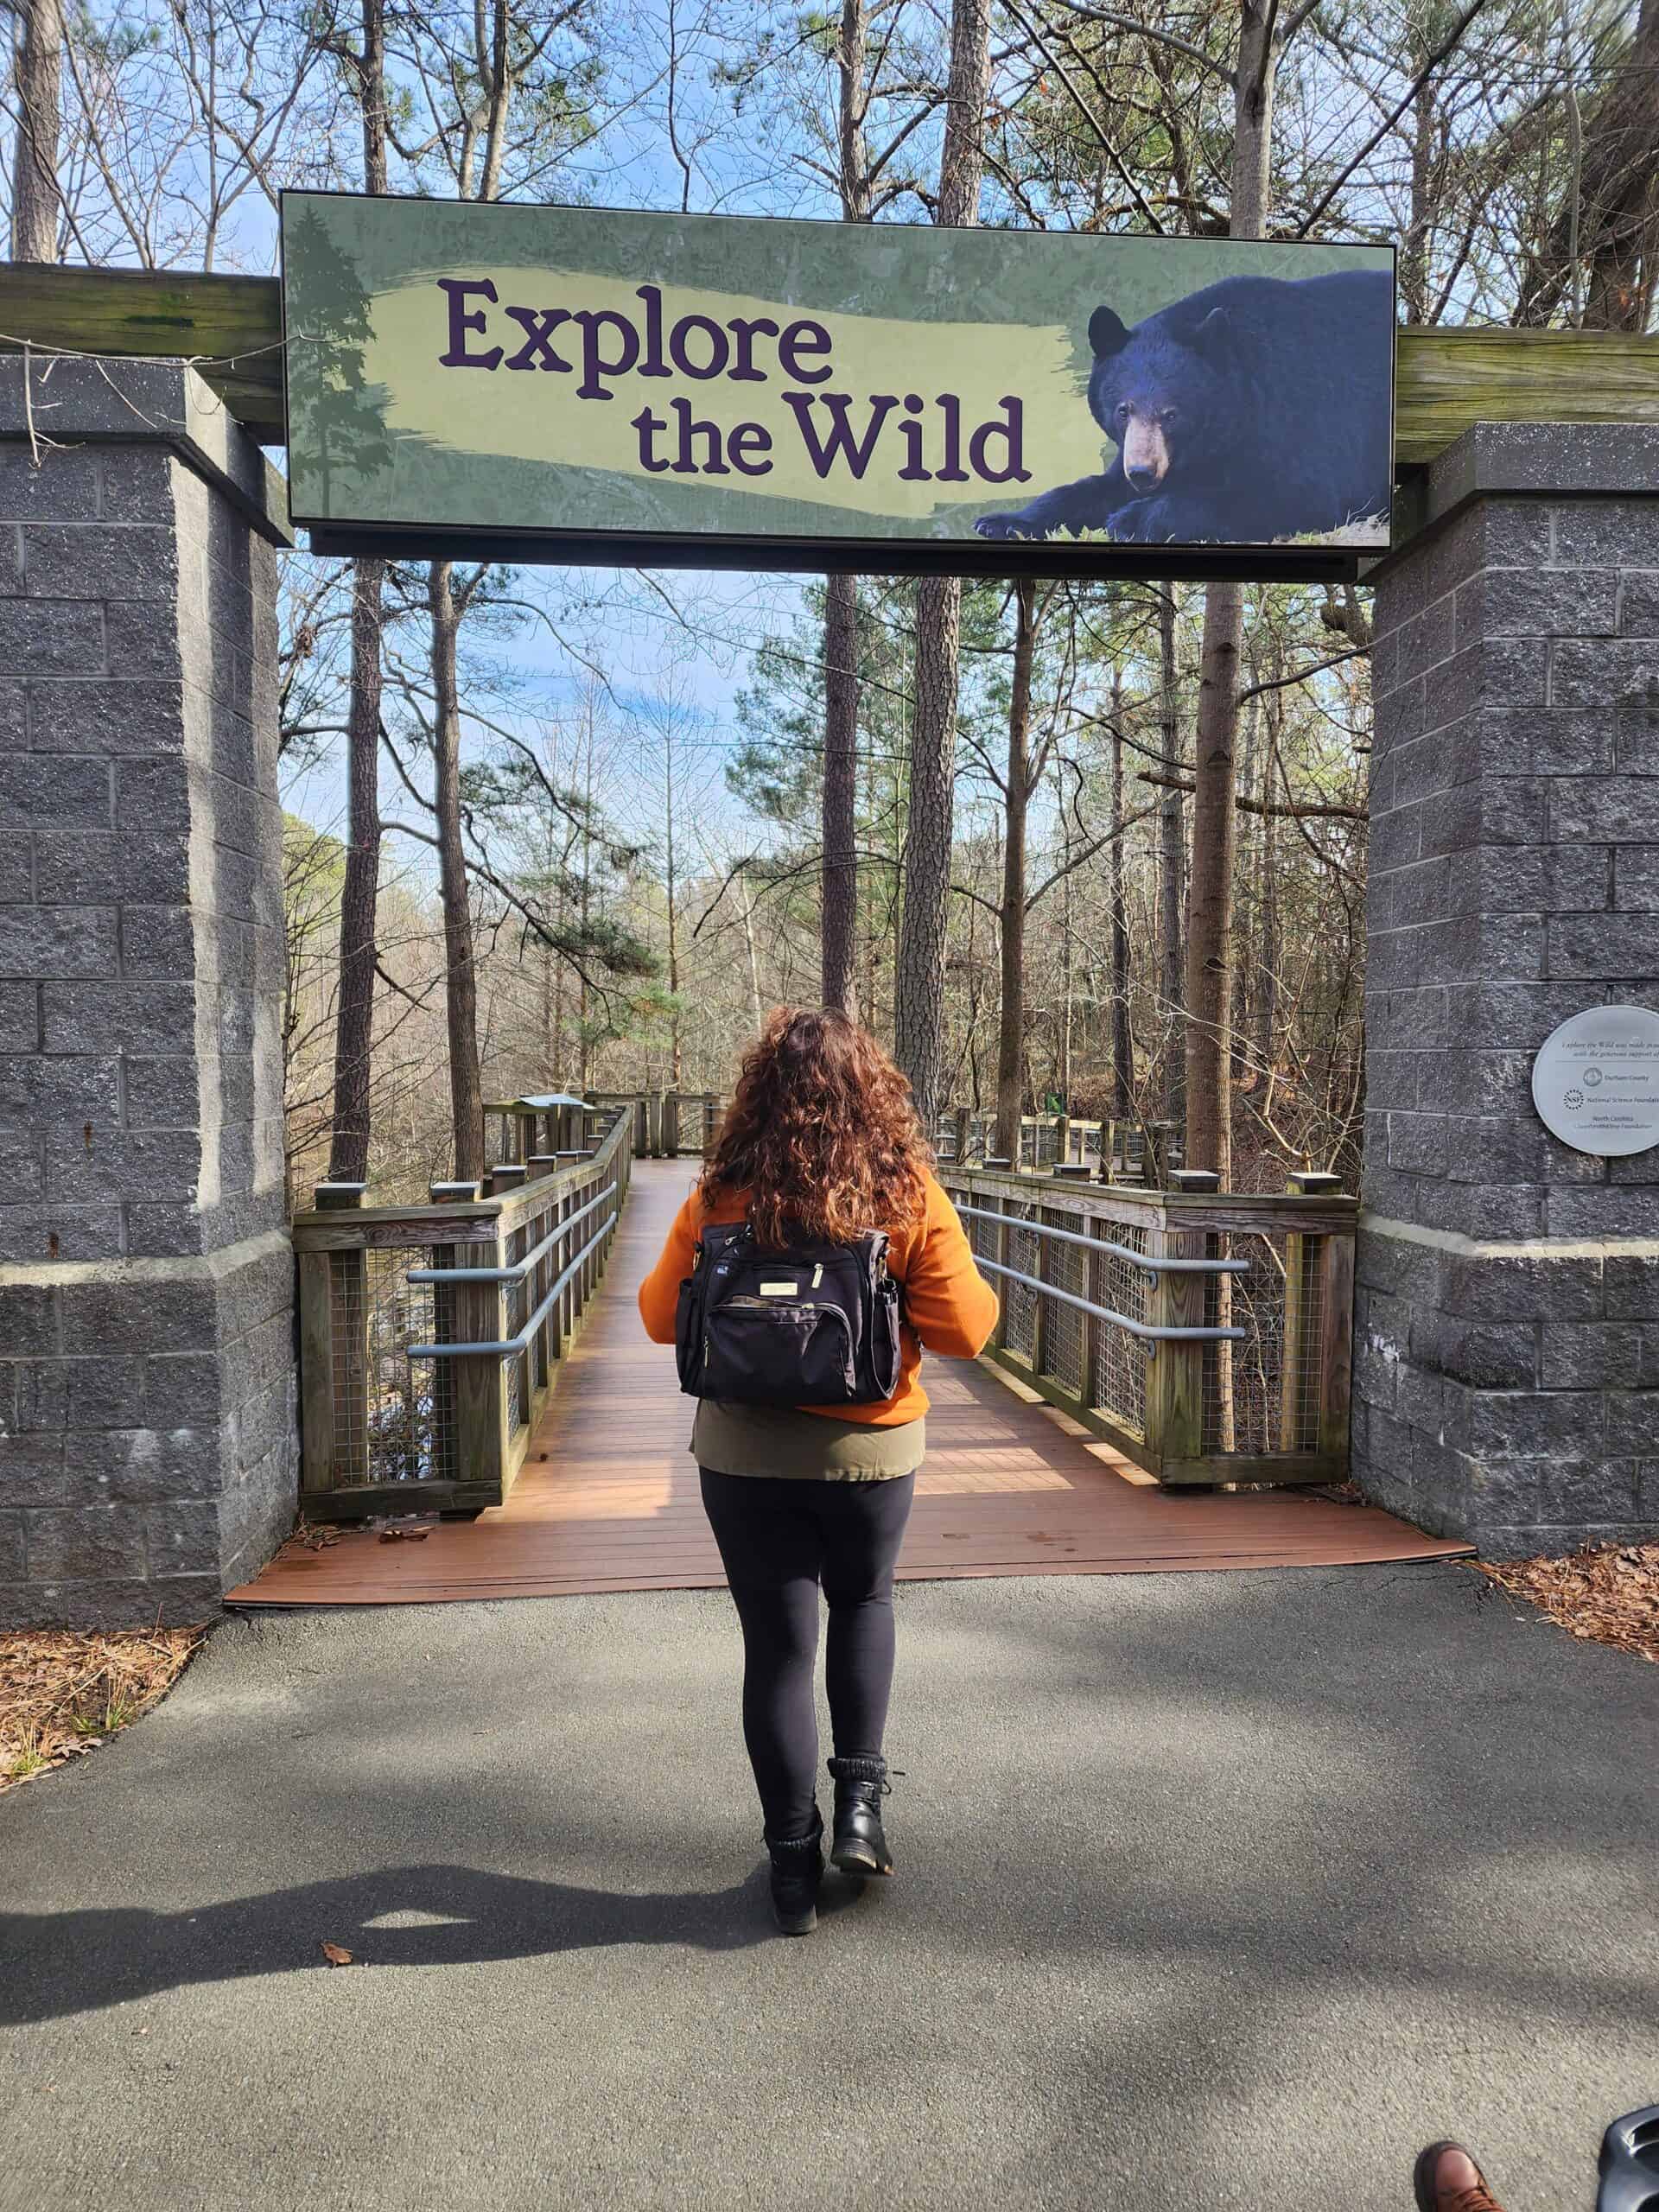 A visitor with a backpack approaches the 'Explore the Wild' entrance at the Museum of Life and Science in Durham, framed by a serene woodland setting and a welcoming sign featuring a black bear image.